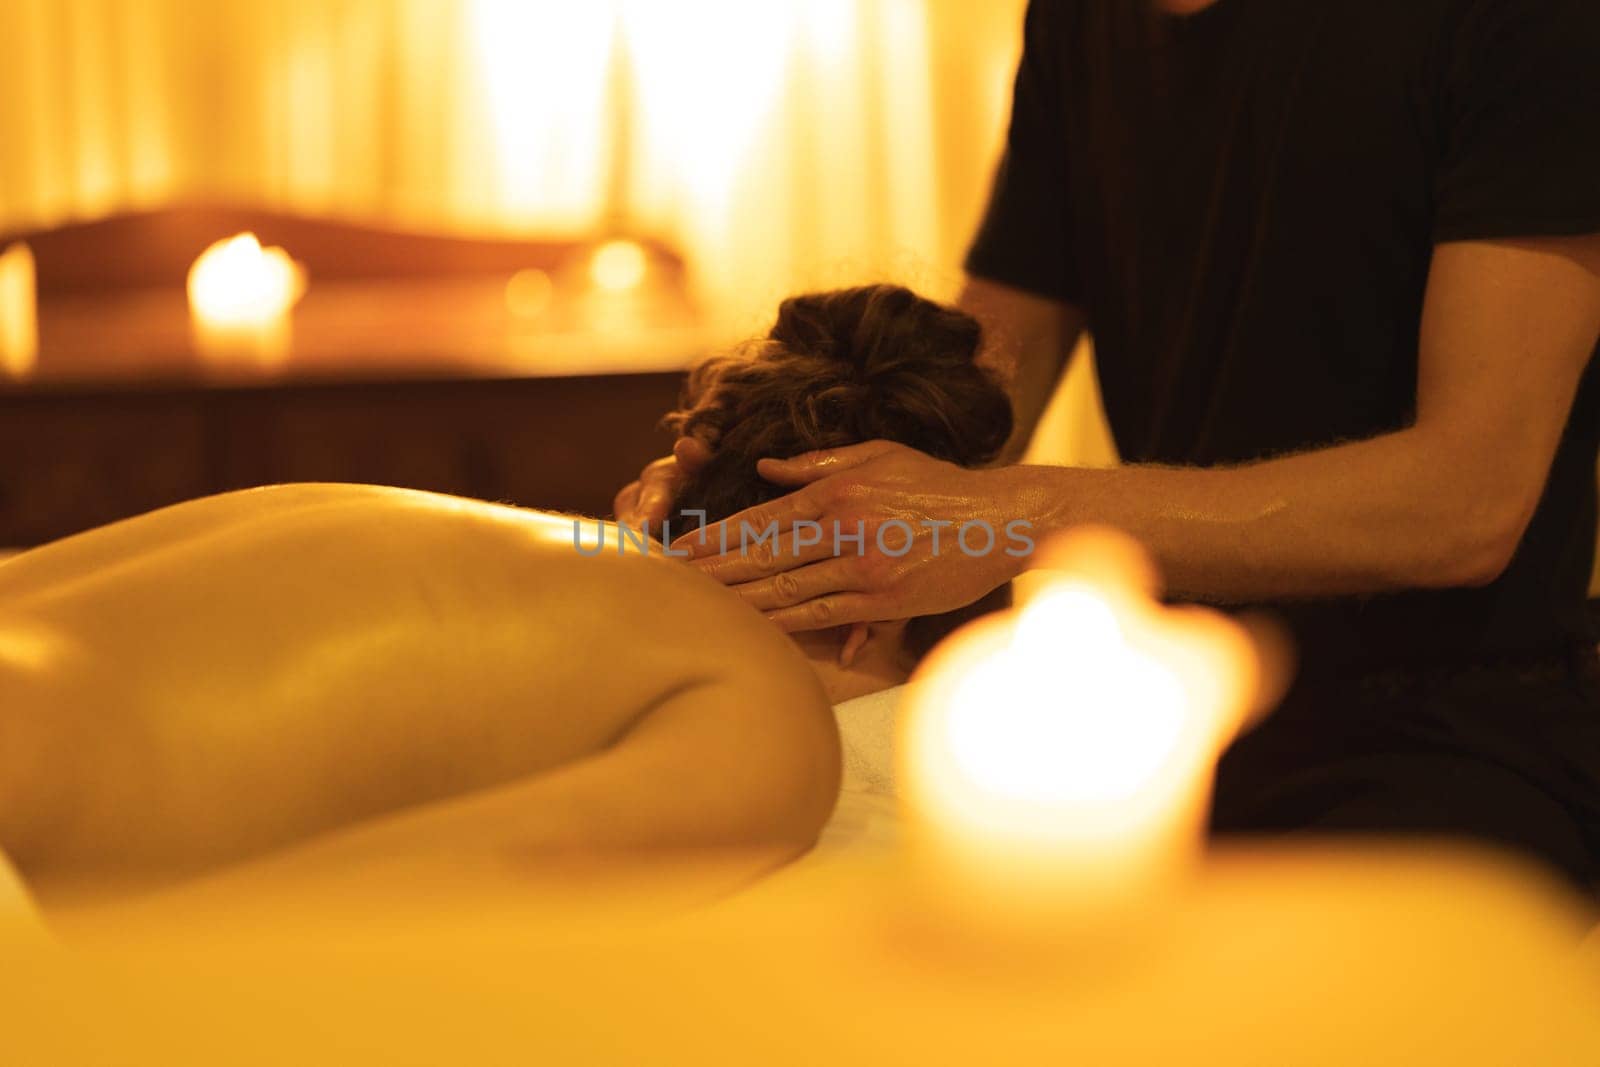 Massage session in SPA salon - massaging the head of a woman. Mid shot